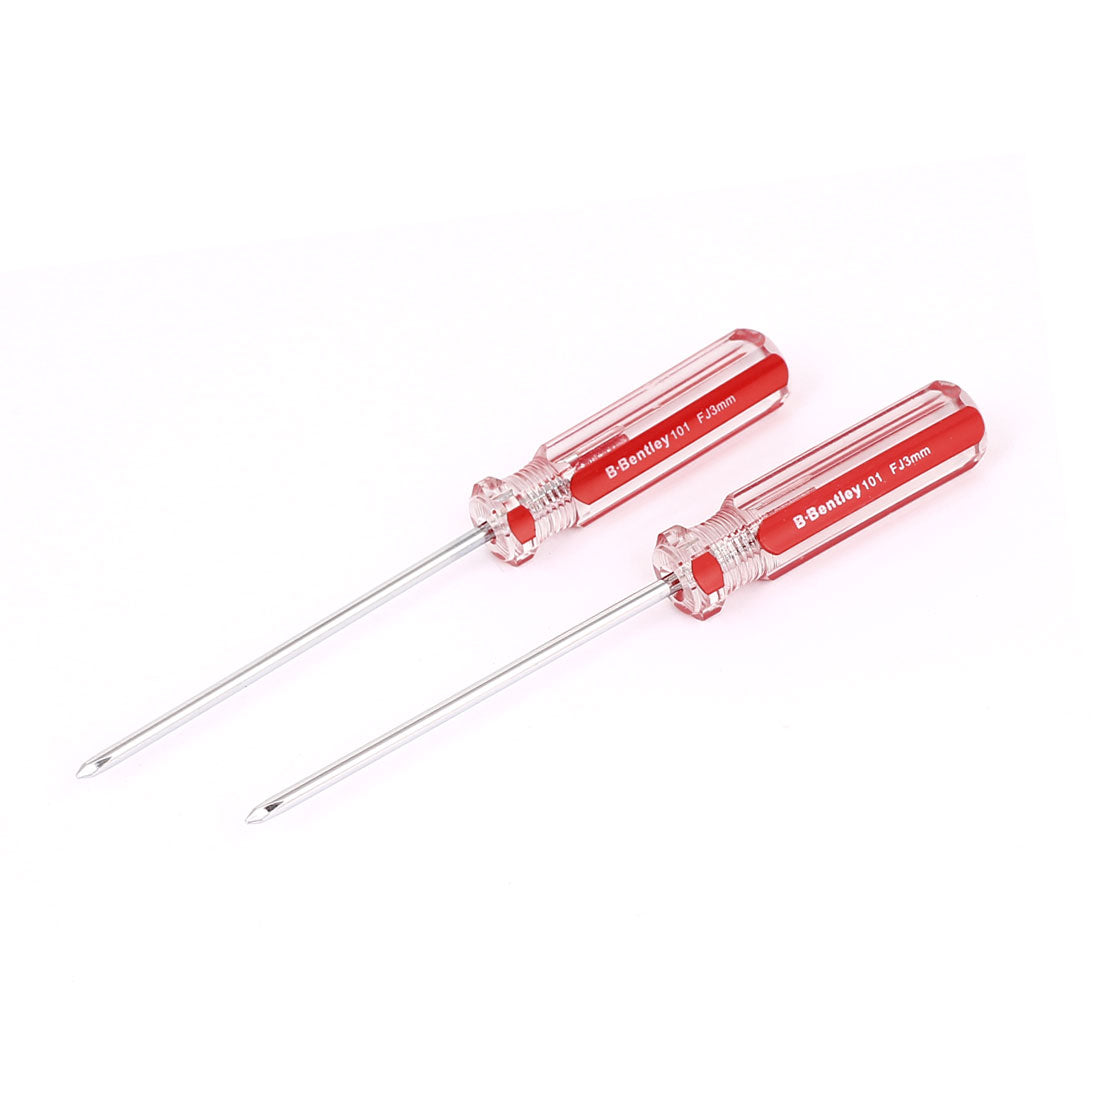 uxcell Uxcell 3mmx75mm Shaft 3mm Magnetic Tip Plastic Handle Phillips Screwdriver 2pcs